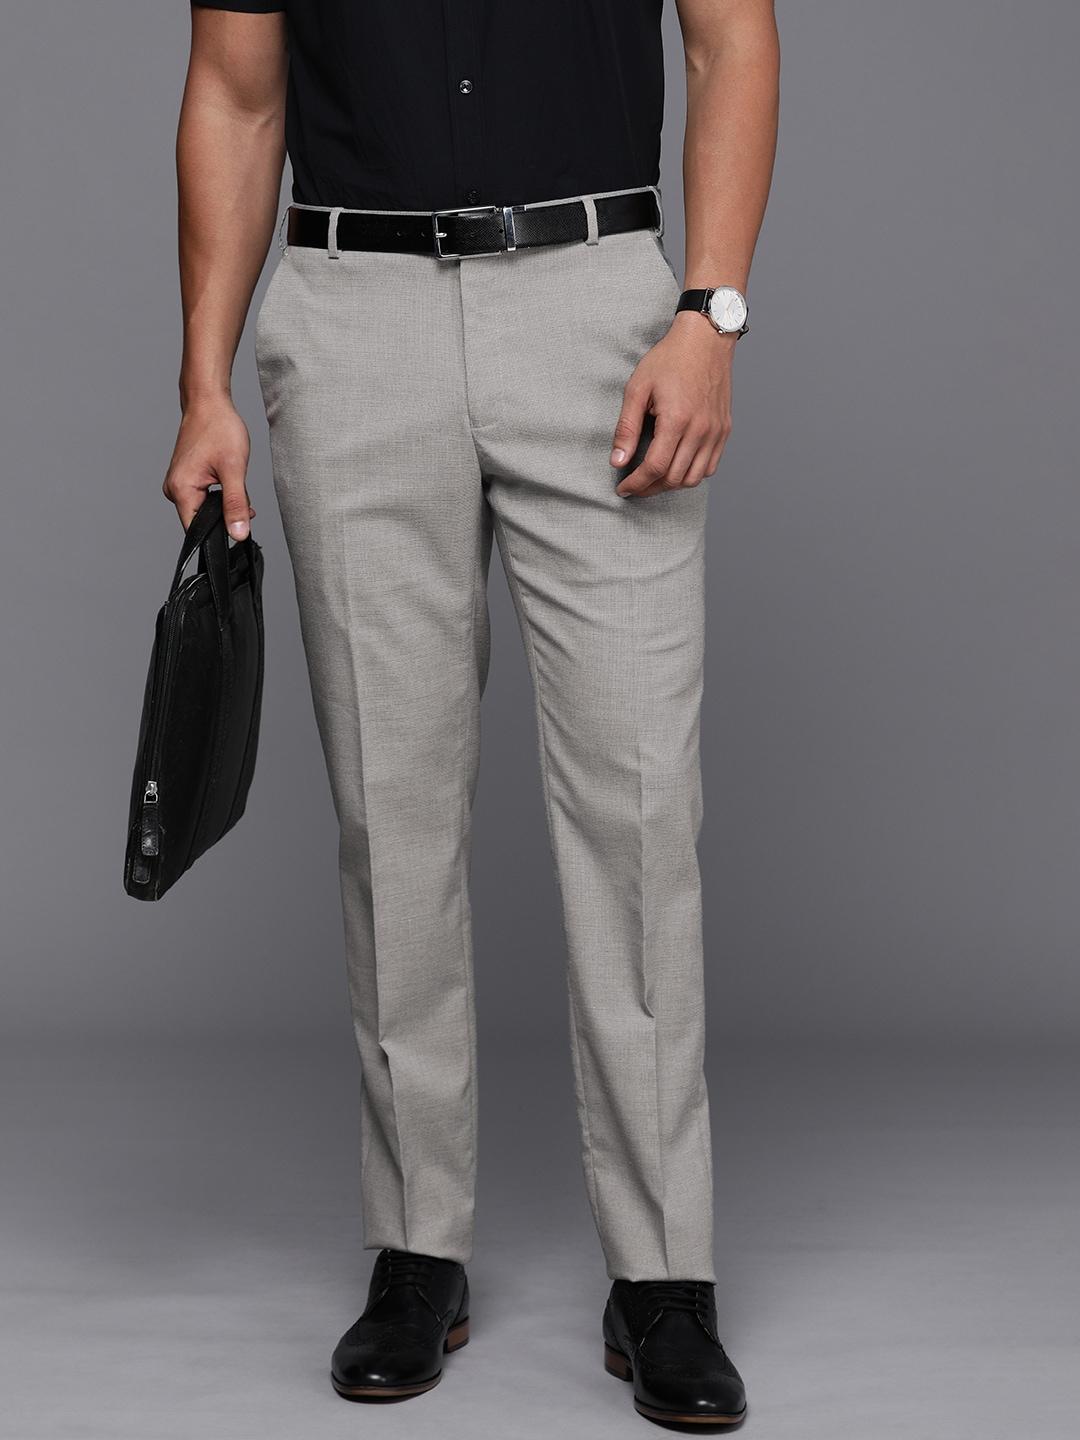 raymond-men-textured-slim-fit-mid-rise-formal-trousers